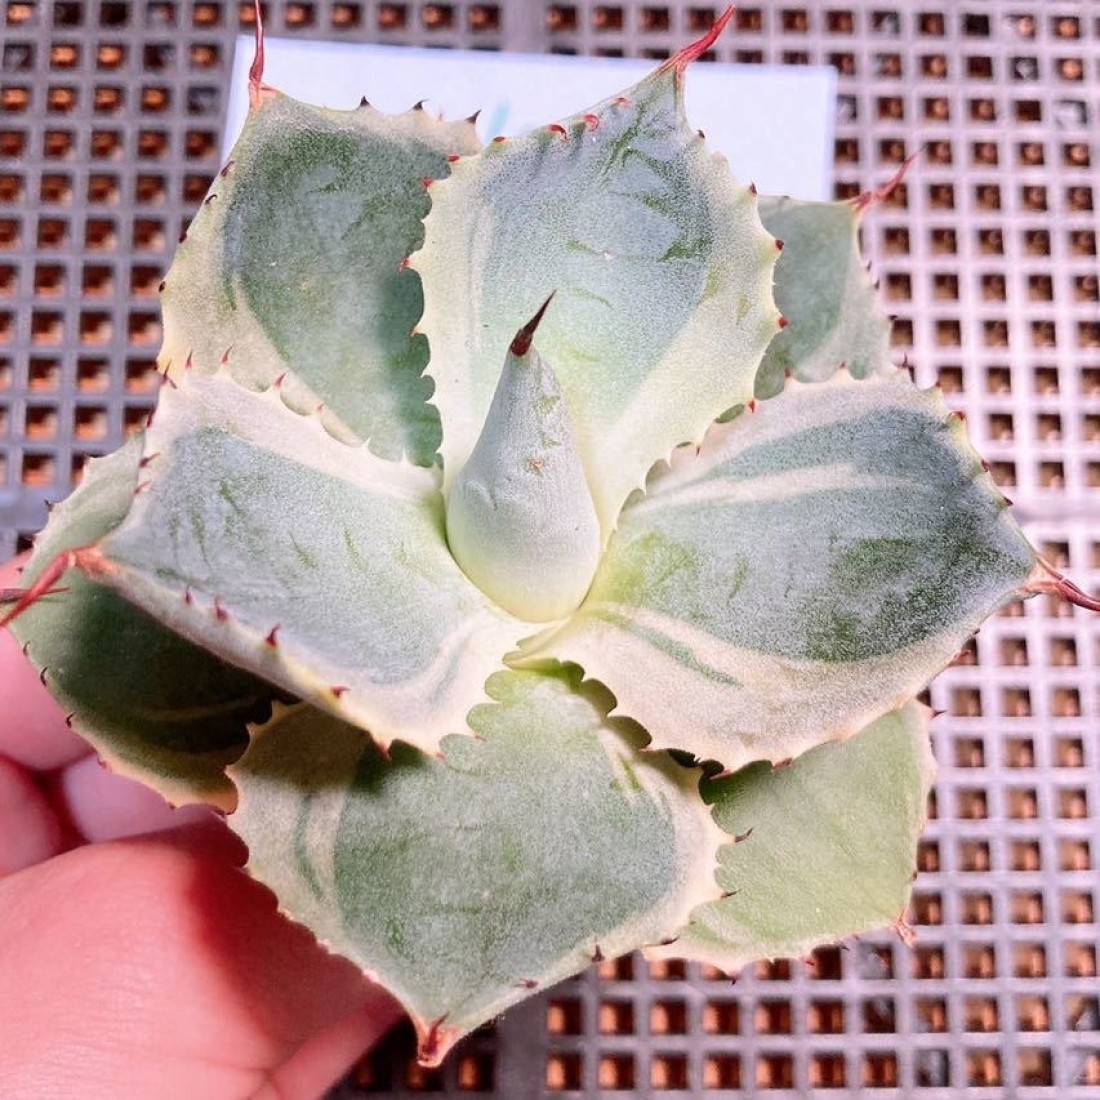 Agave Potatorum Variegated Tradewinds Rare Exotic agave healthy live plant 4 inches in white plastic pot